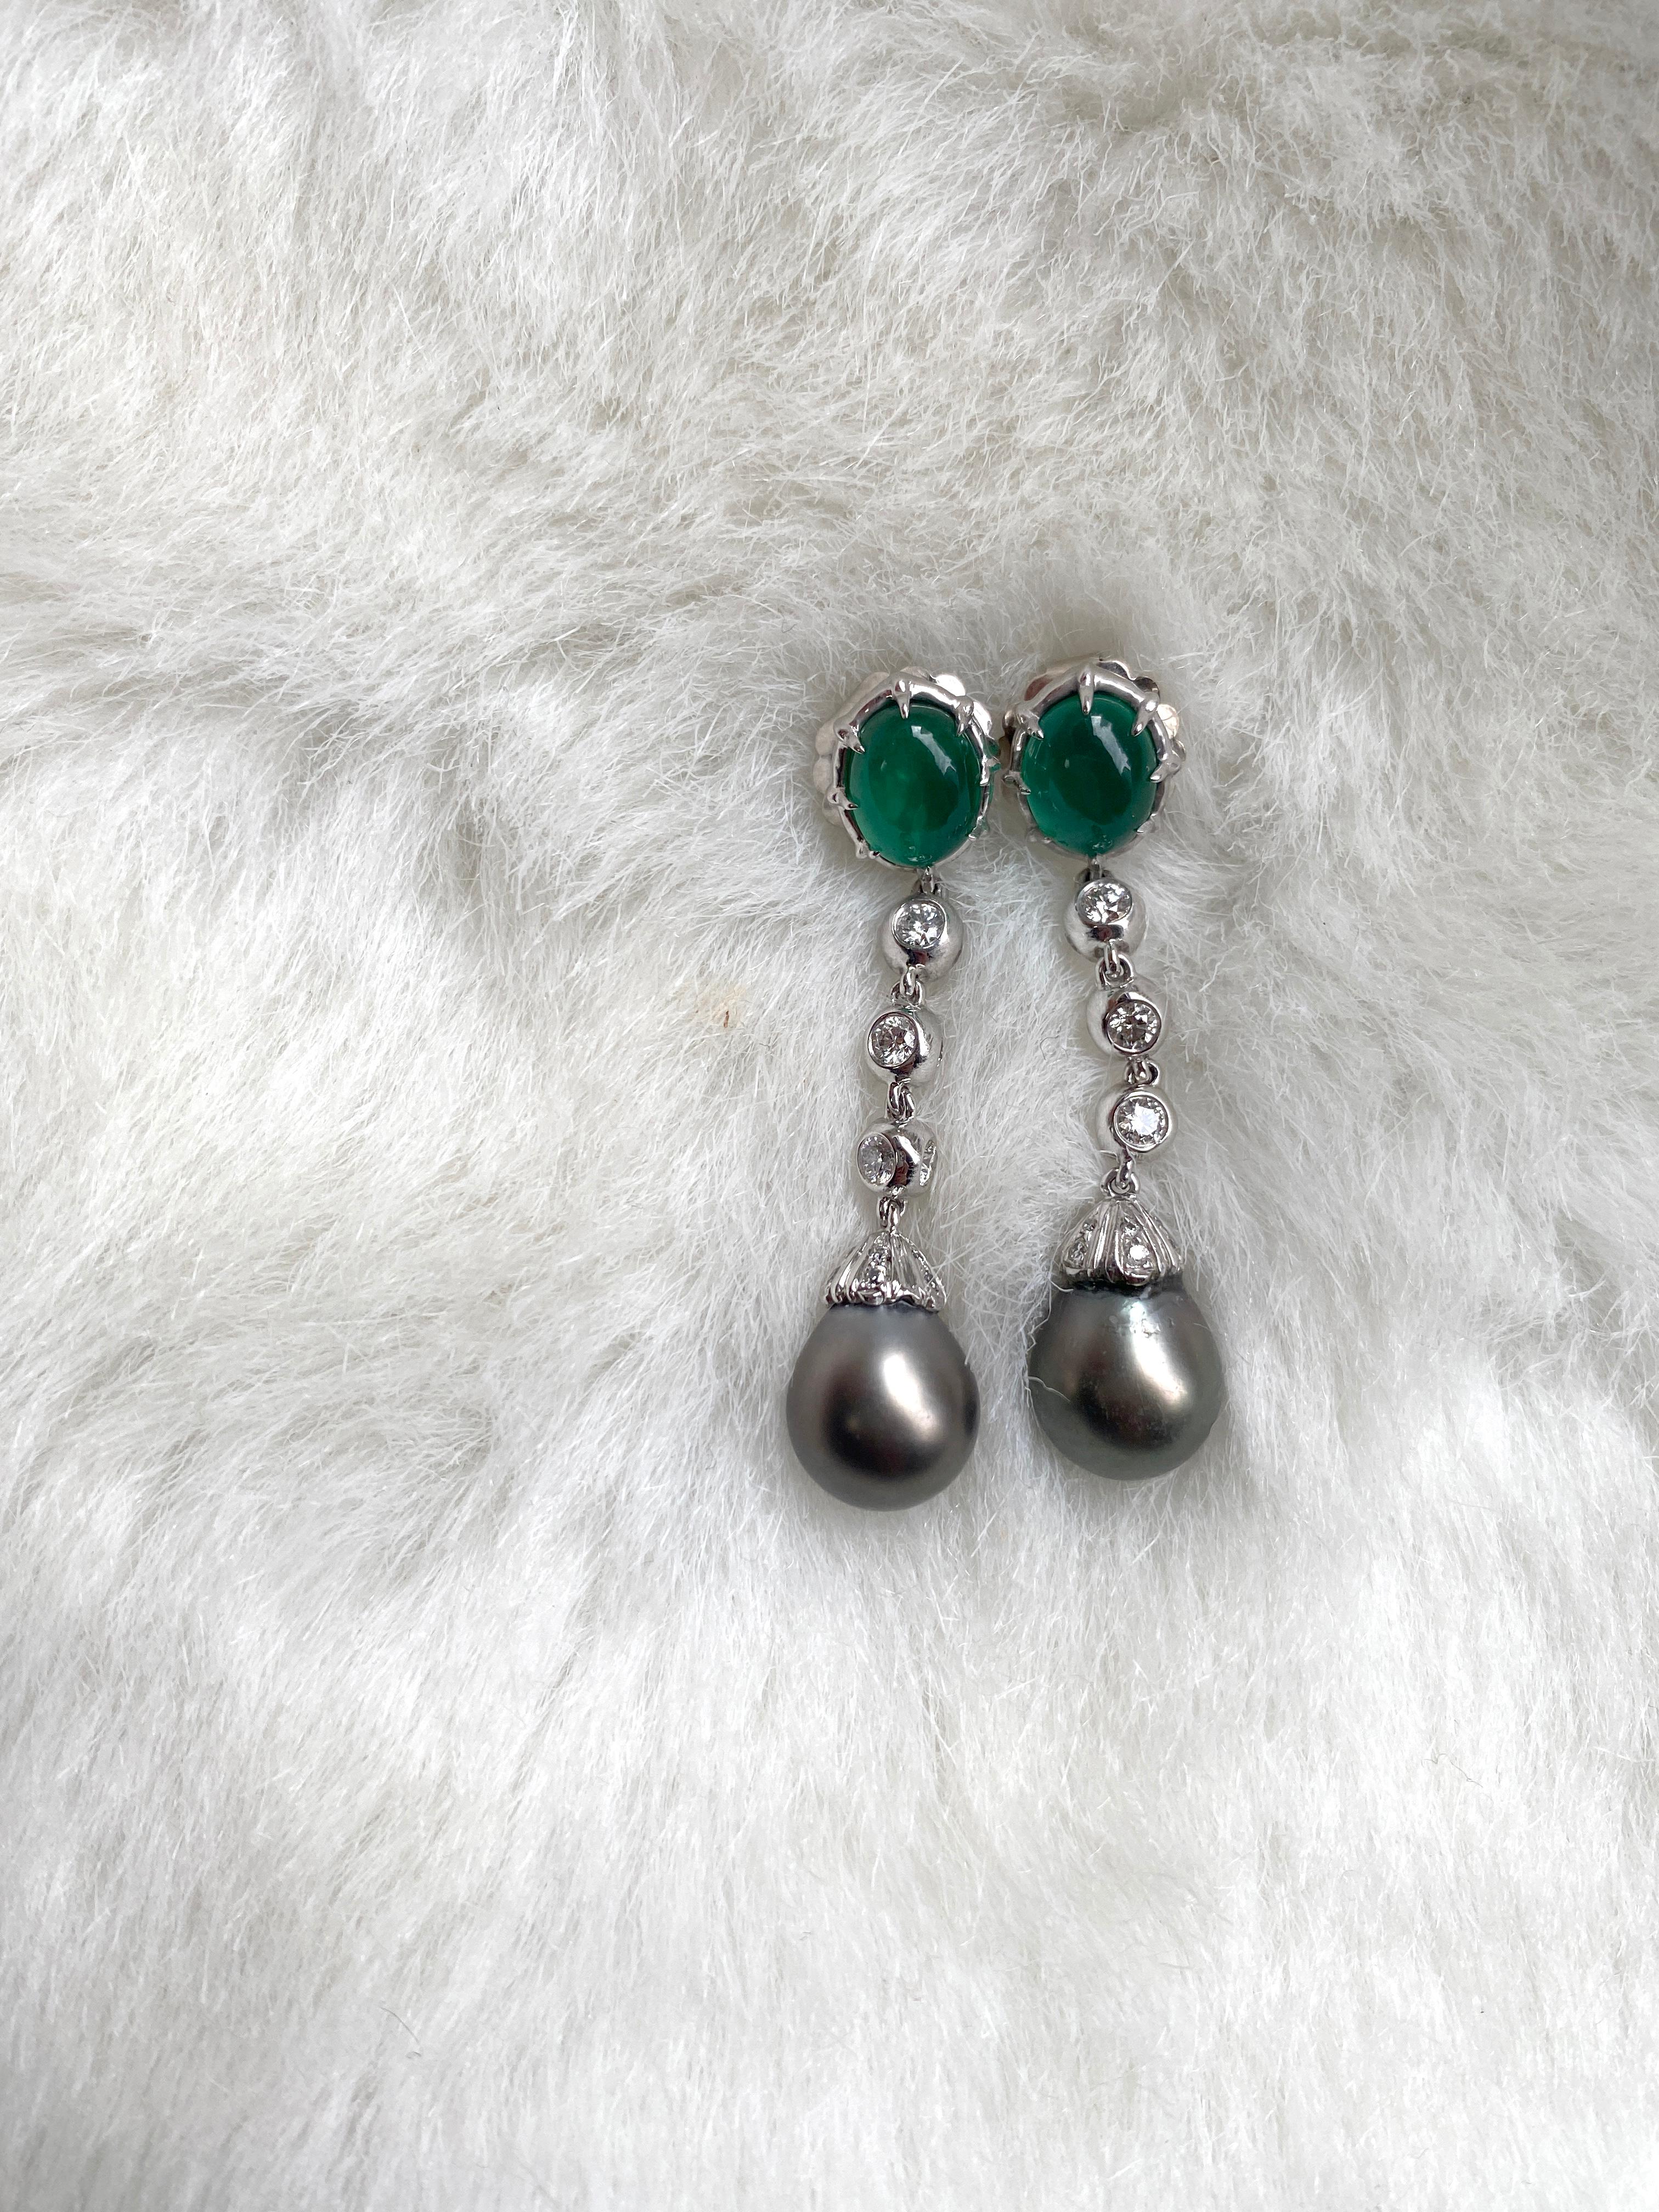 Emerald Oval Cabs And Grey Pearl Long Earrings with Diamonds in Platinum, from 'G-One' Collection. If you want to make a statement, these are the perfect earrings to do it! 

* Gemstone: 100% Earth Mined 
* Approx. gemstone Weight: 3.62 Carats